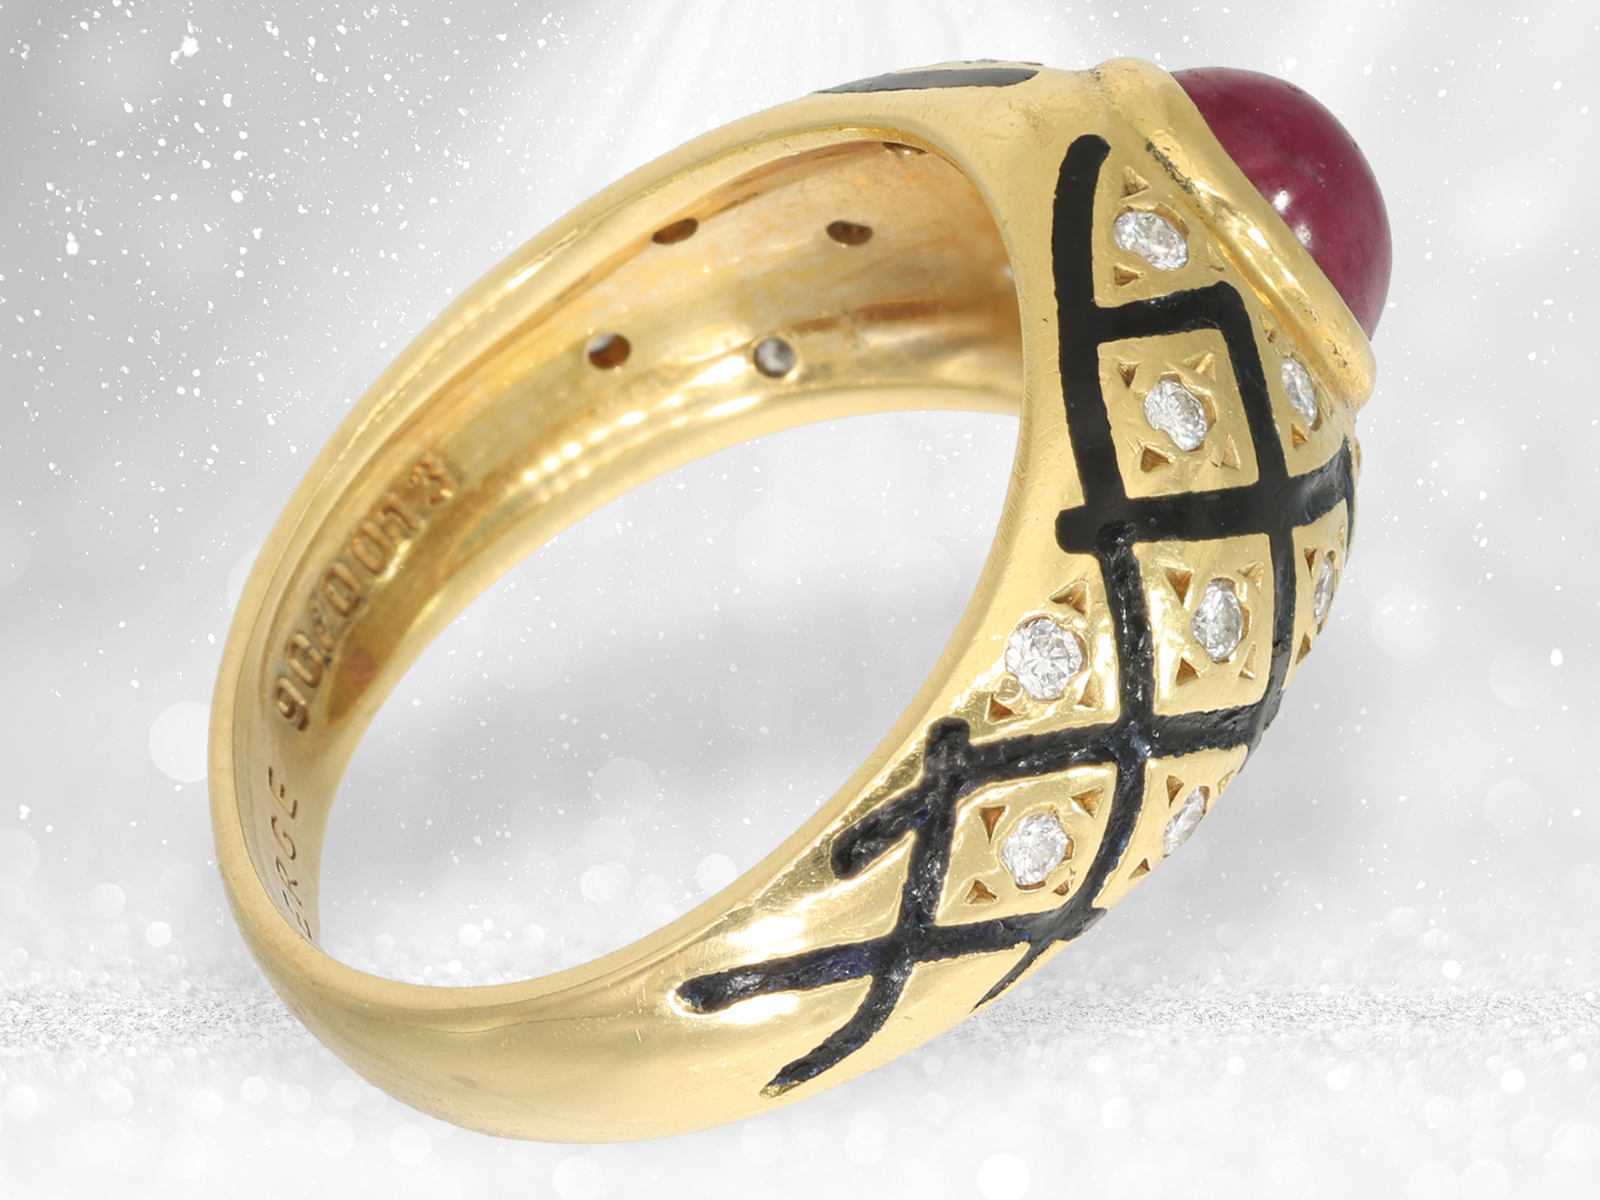 Rare vintage ruby/brilliant-cut diamond ring, FABERGÉ JEWELLERY by VICTOR MAYER - Image 5 of 5